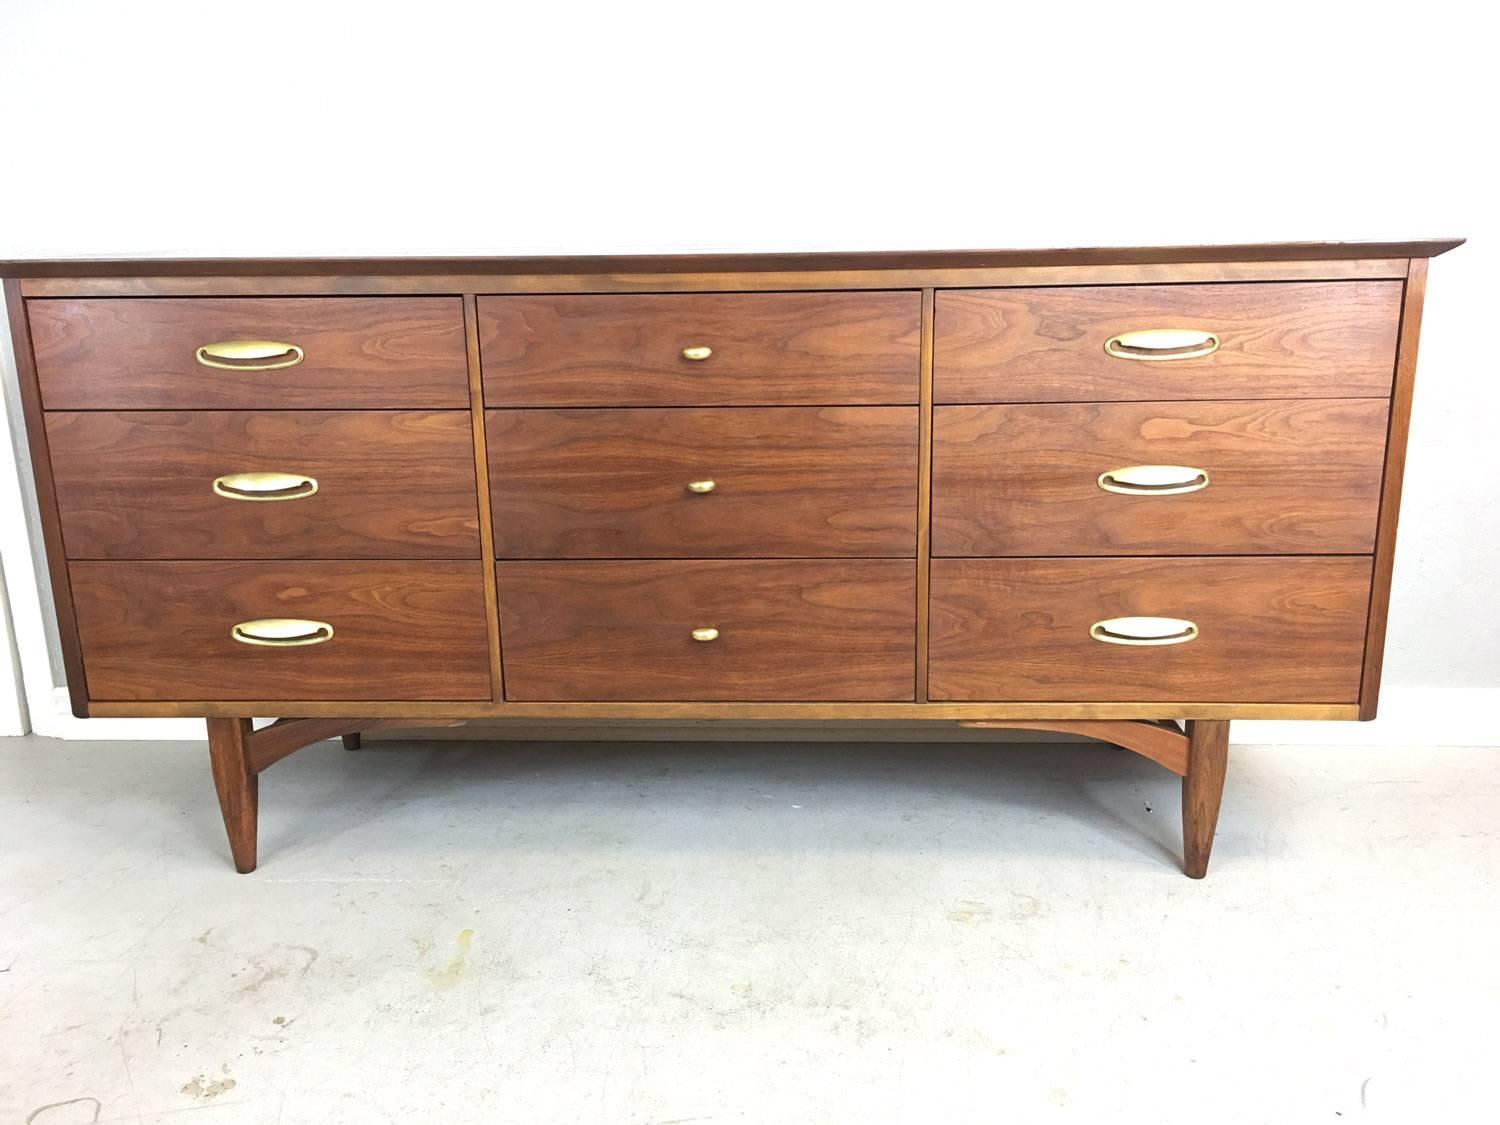 Sleek nine-drawer "Vega" dresser by Morris in walnut. Vega was the high end line by Morris and note that the walnut used by Morris is so rich that it often it is mistaken as teak. The craftsmanship on this dresser is exquisite. See the